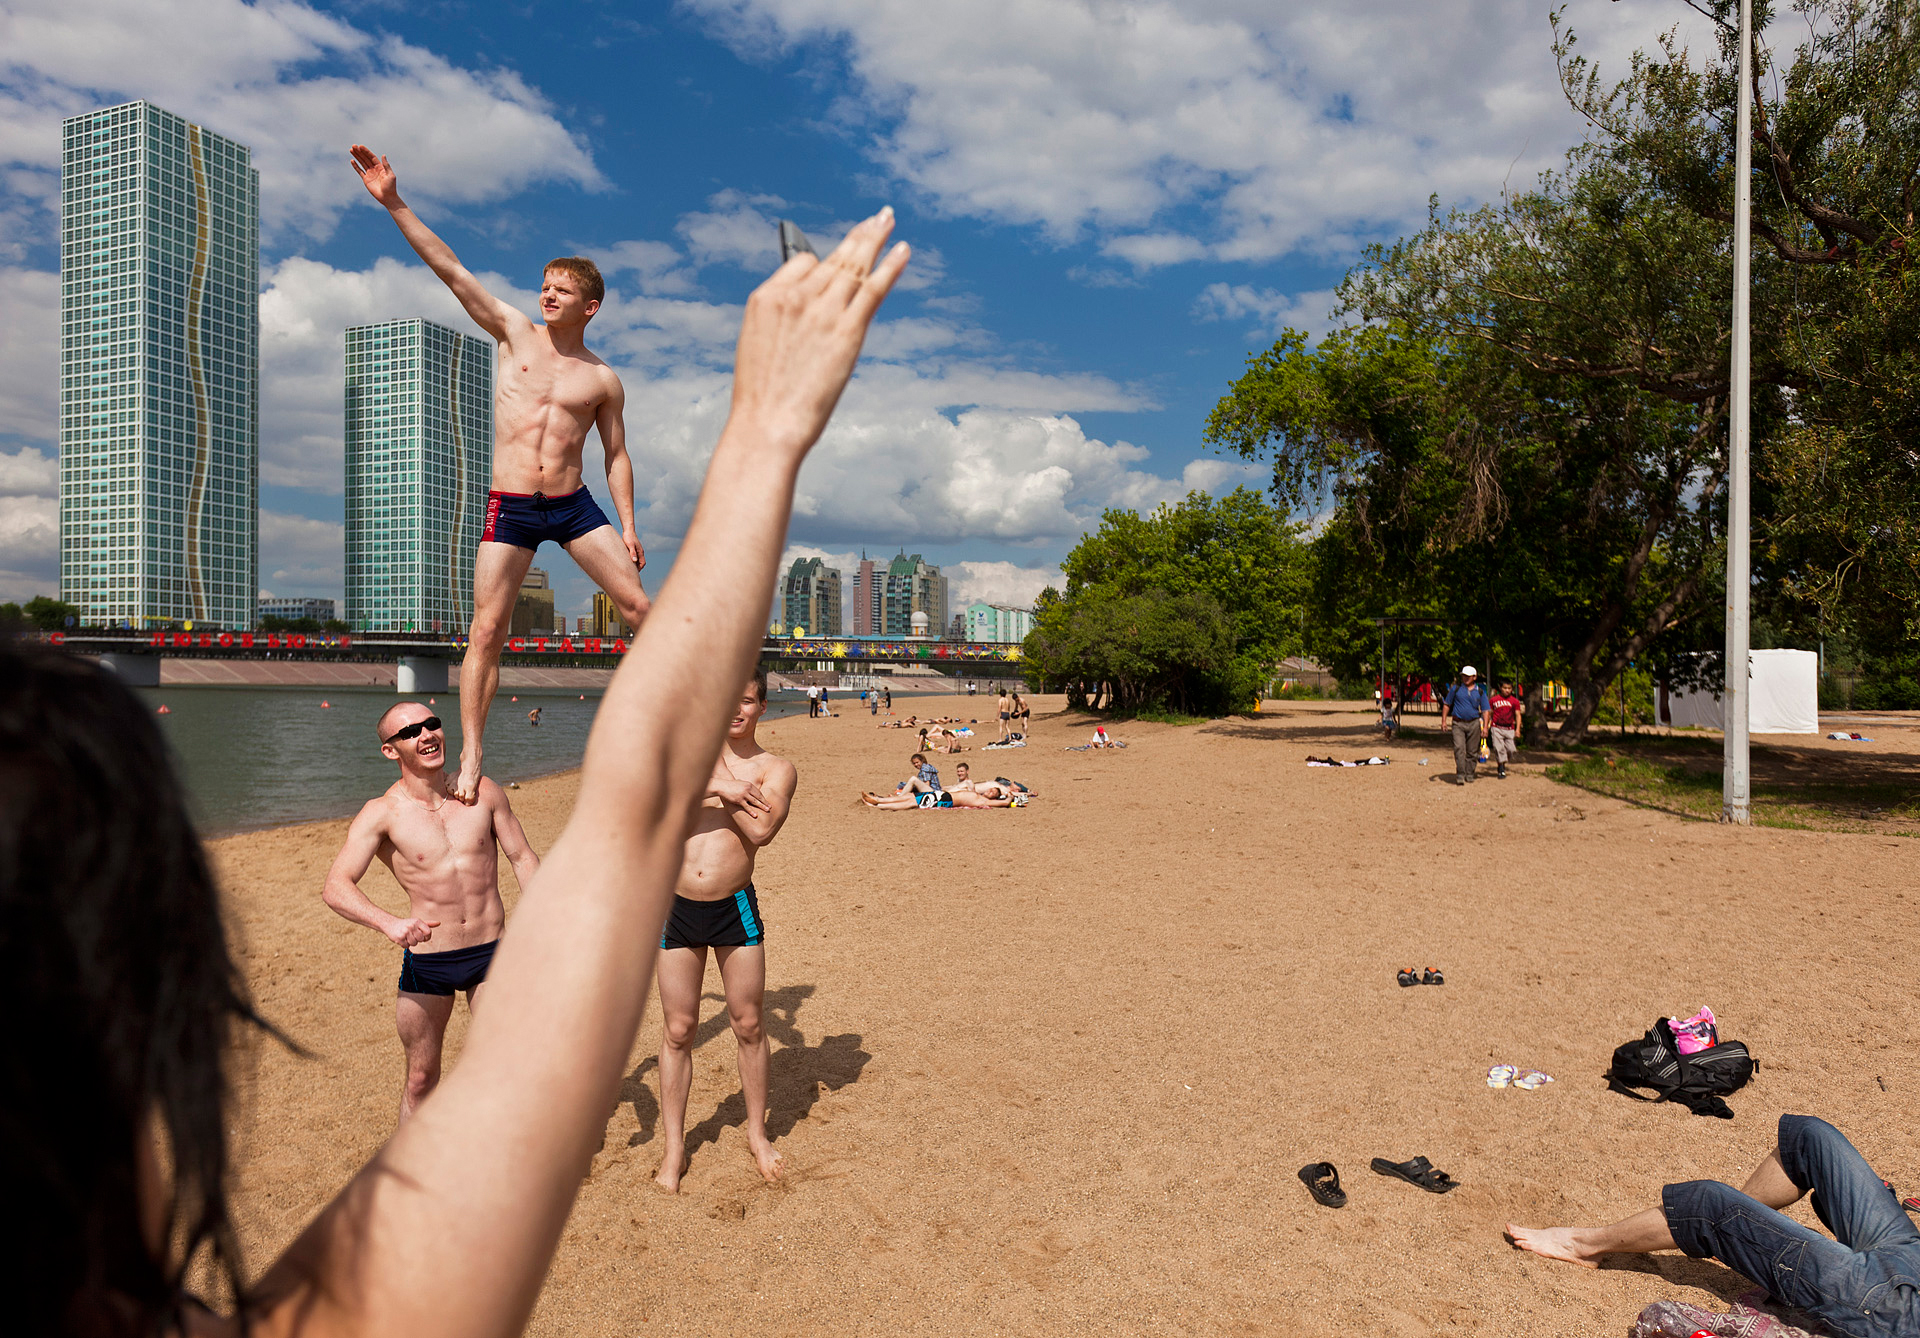  The French Riviera it isn't, but Astana makes the most of its brief summer, when young men gather at the Esil River to flex their muscles before appreciative members of the opposite sex.  Astana, Kazakhstan  